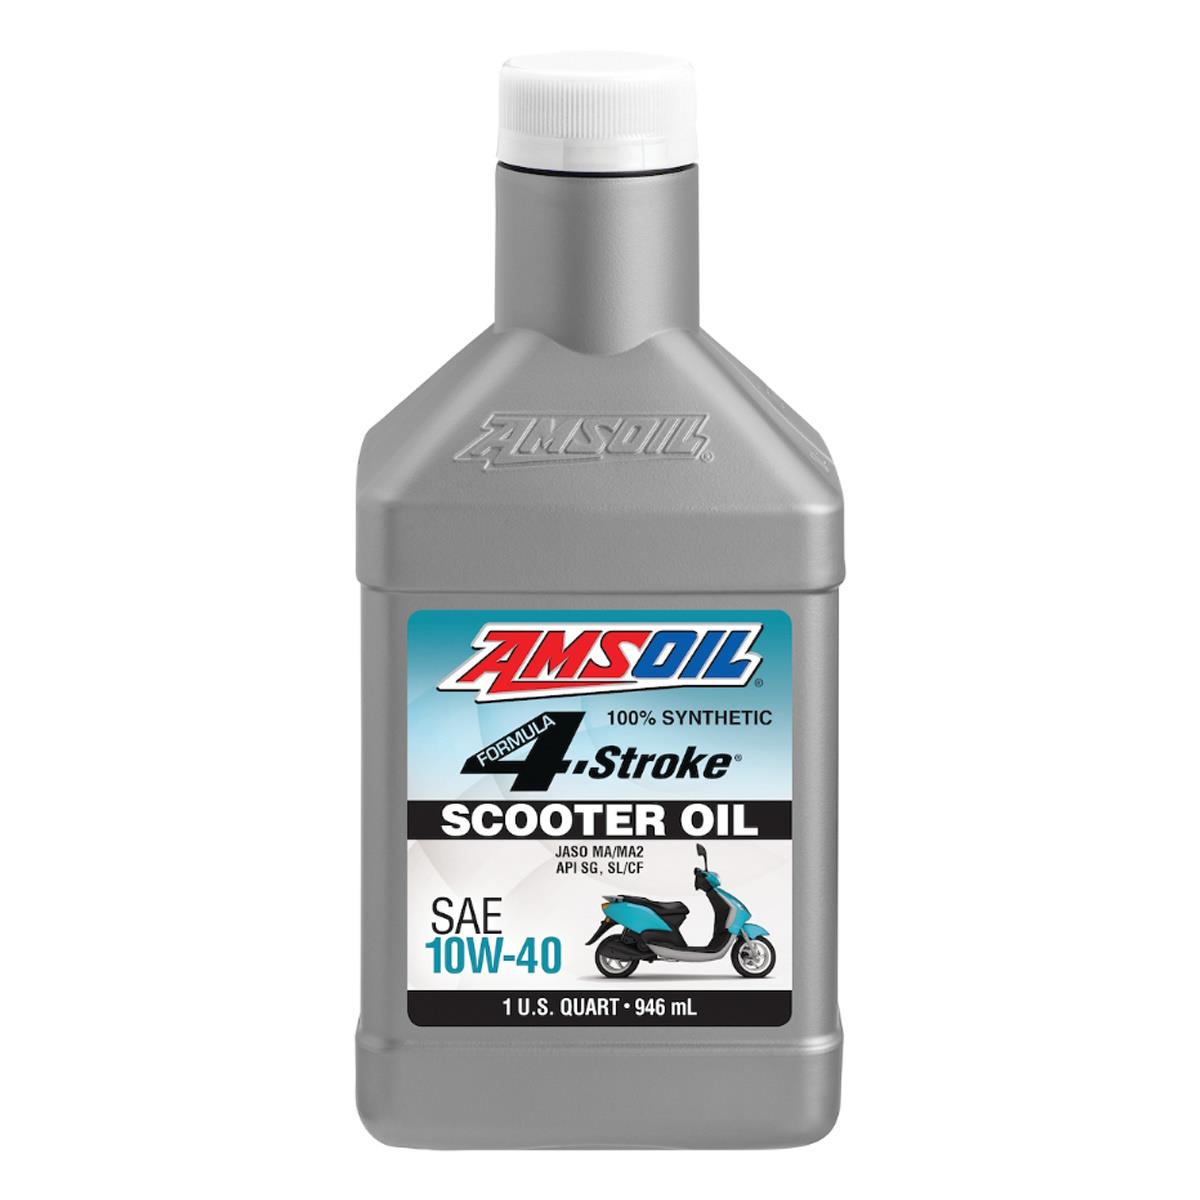 AMSOIL 10W40 Formula 4-Stroke® 100% Synthetic Scooter Oil